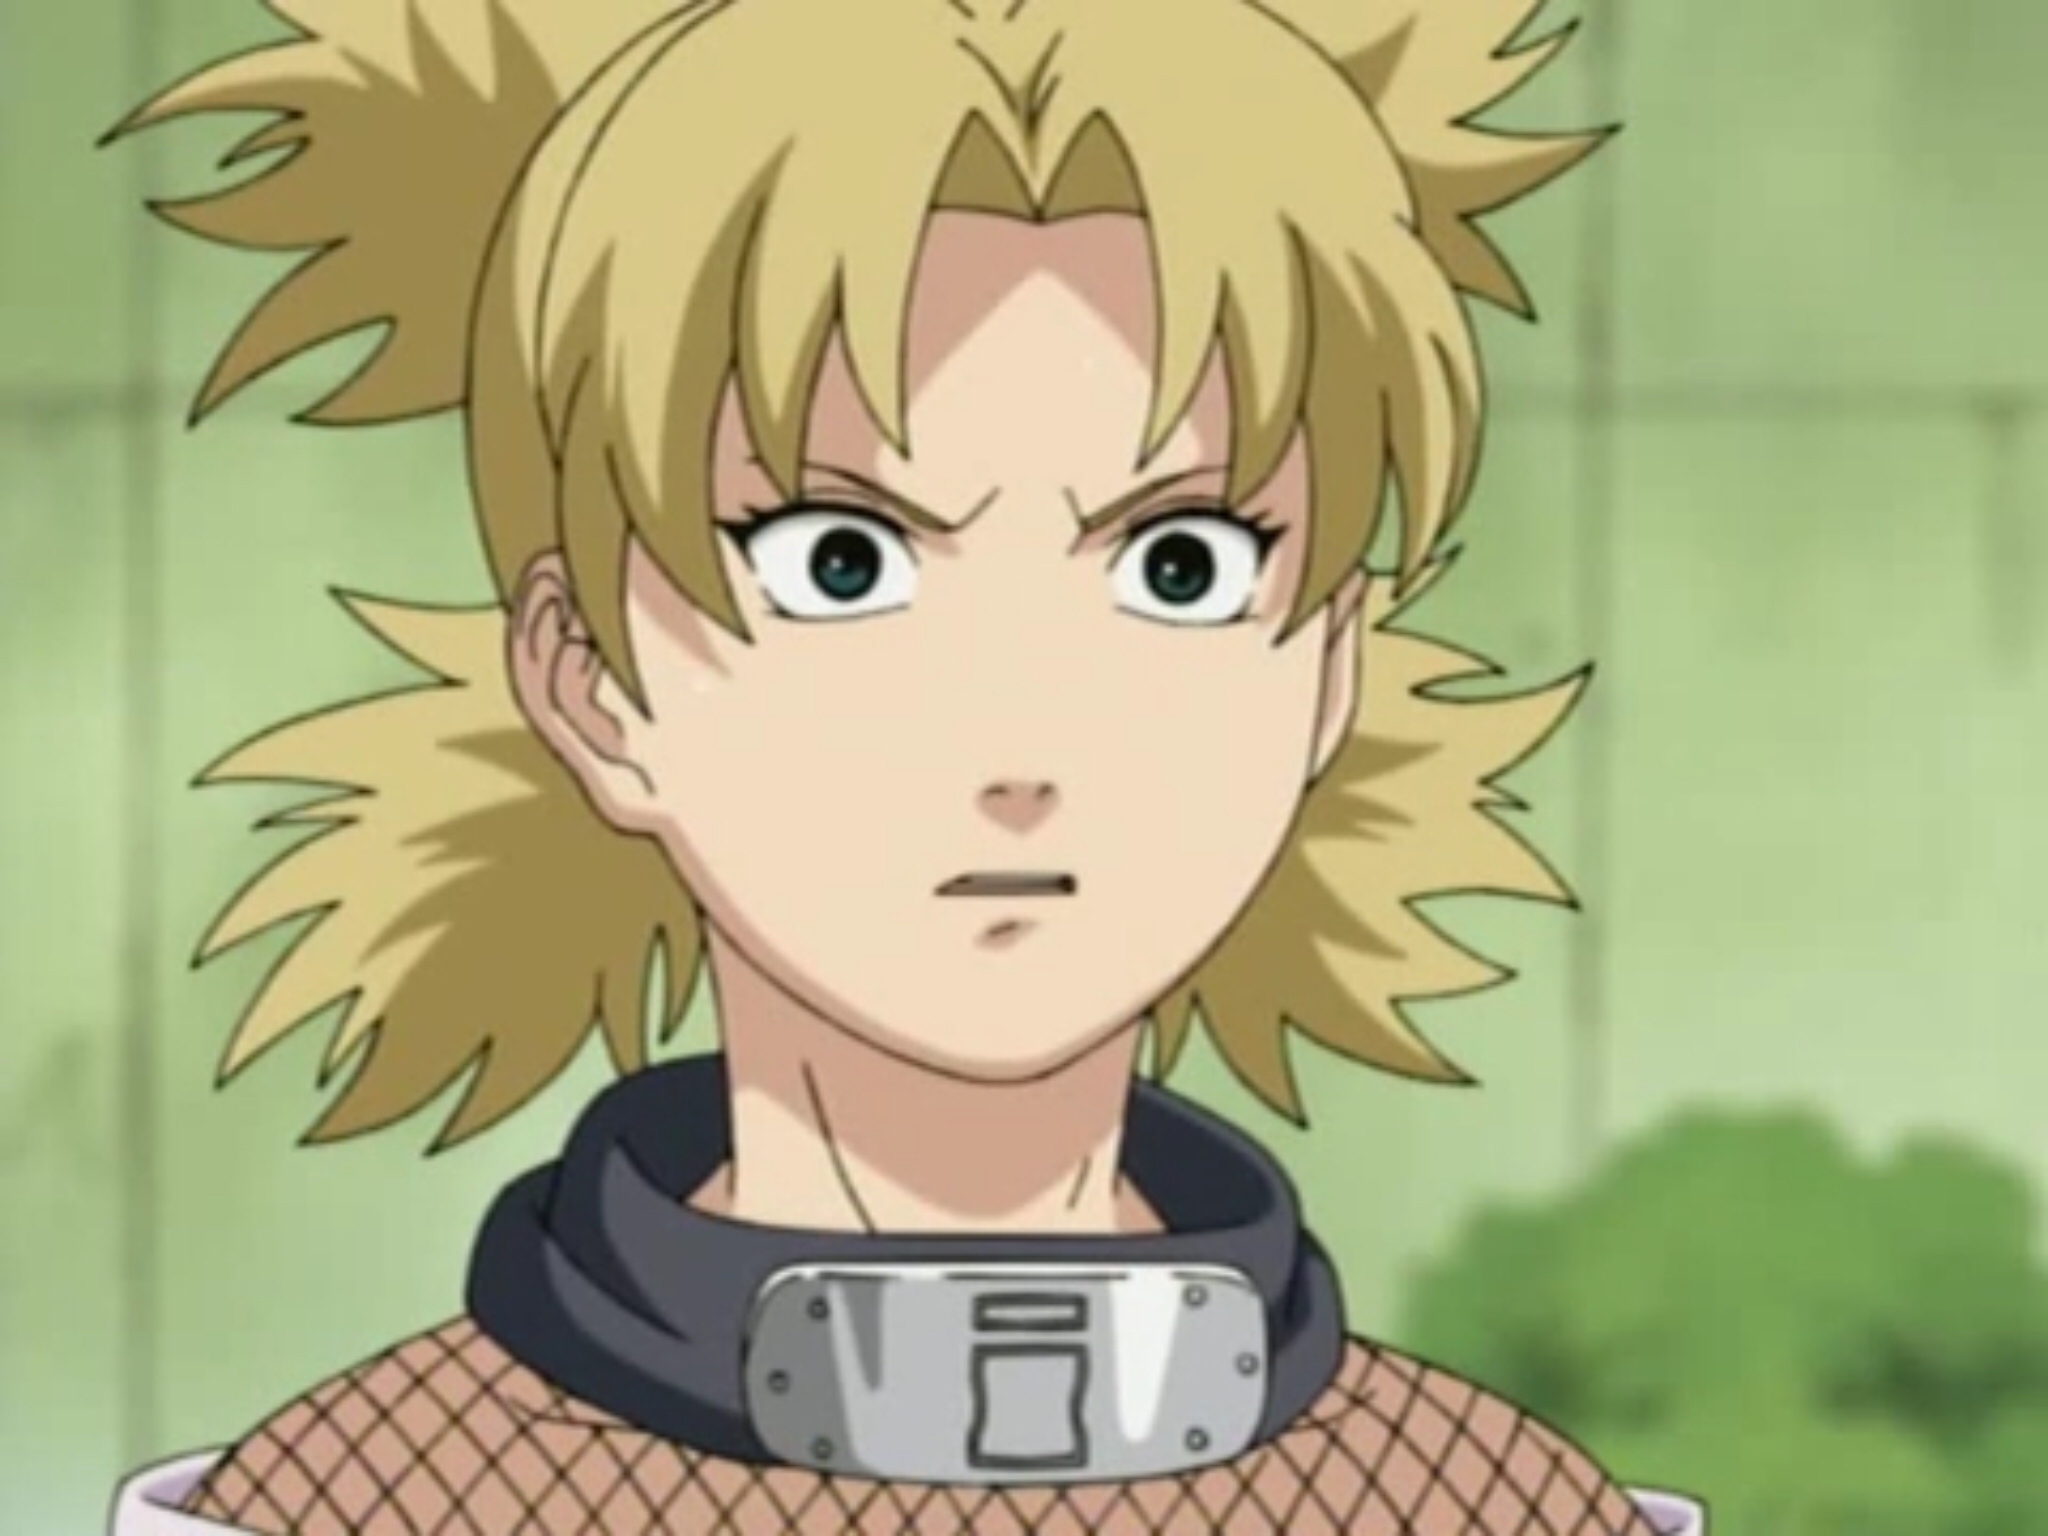 Temari that moment when you realize Blank Meme Template